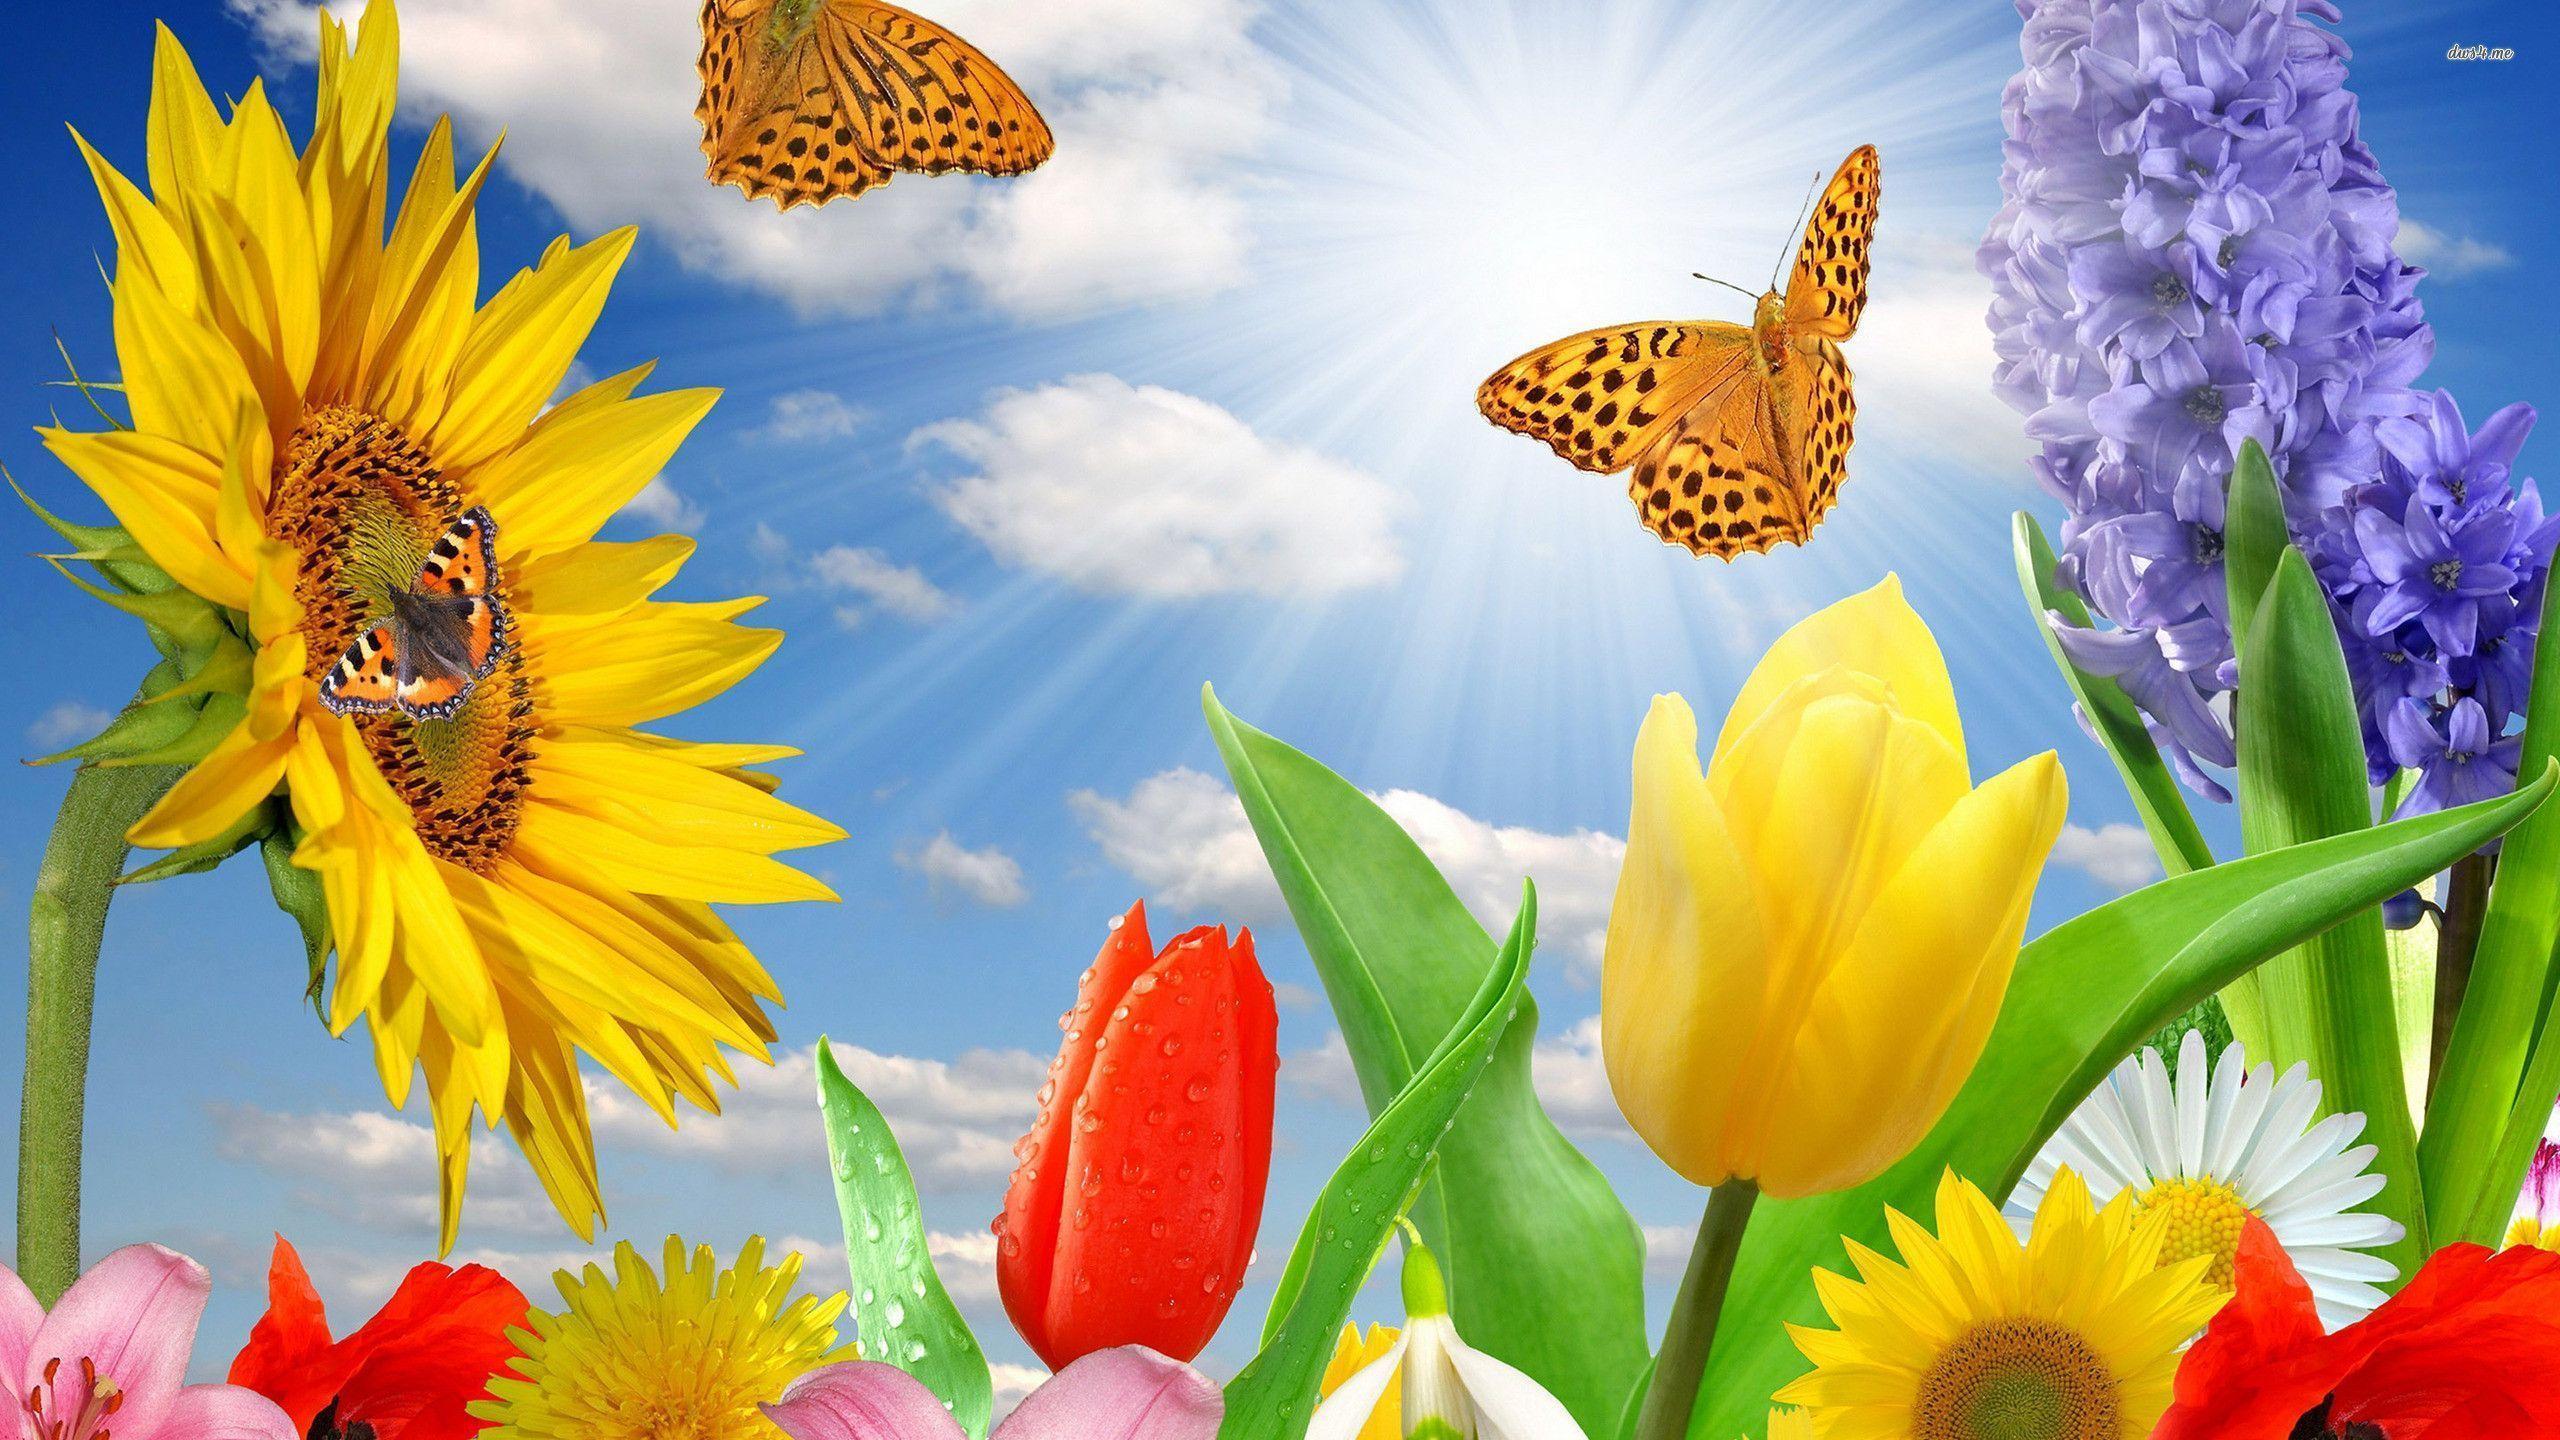 Spring Flowers And Butterflies Background Widescreen 2 HD